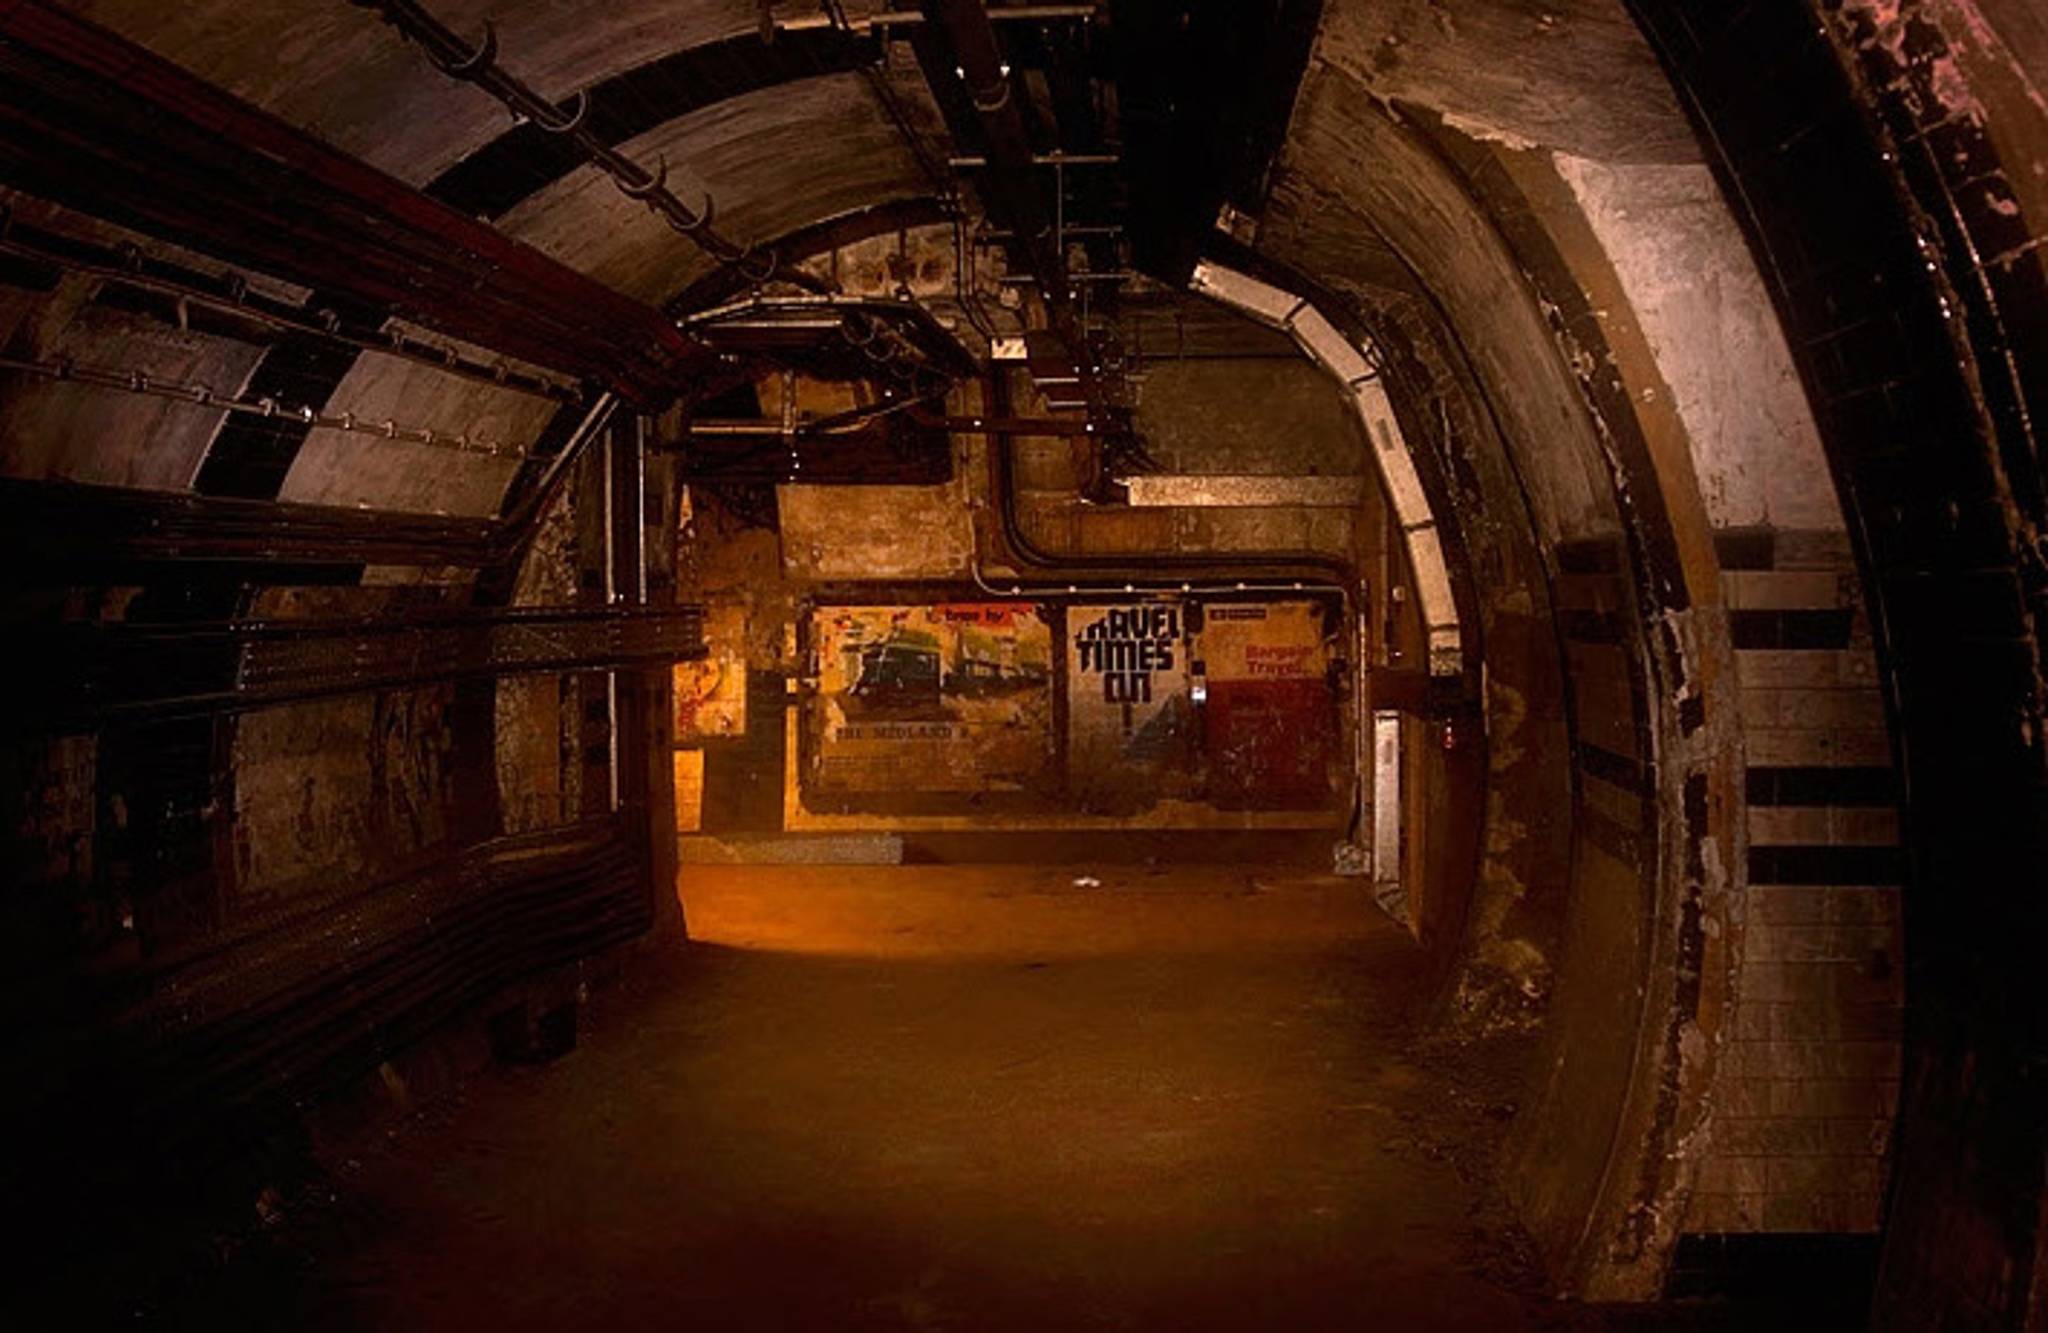 Tunnel vision: reclaiming forgotten spaces